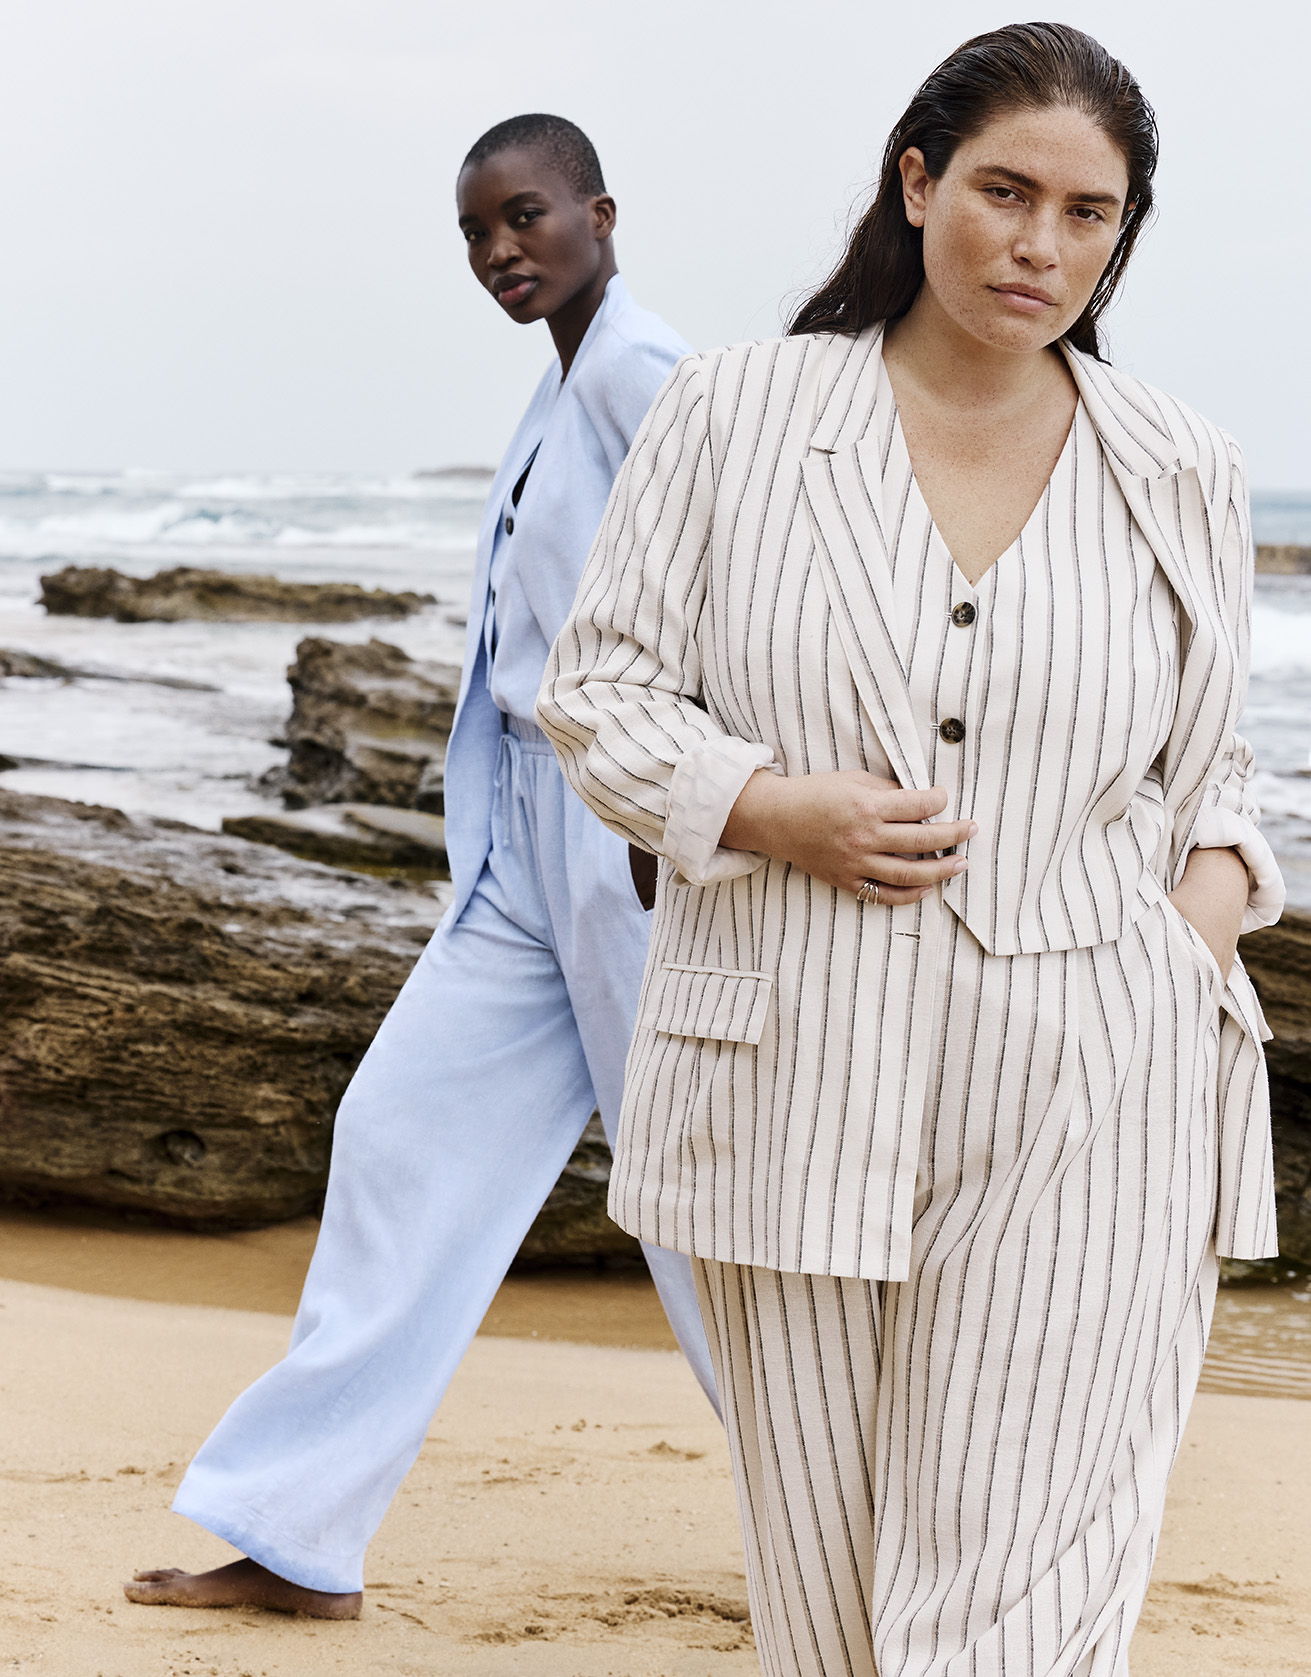 Step into Summer with Five Breezy Linen Looks from Reitmans 